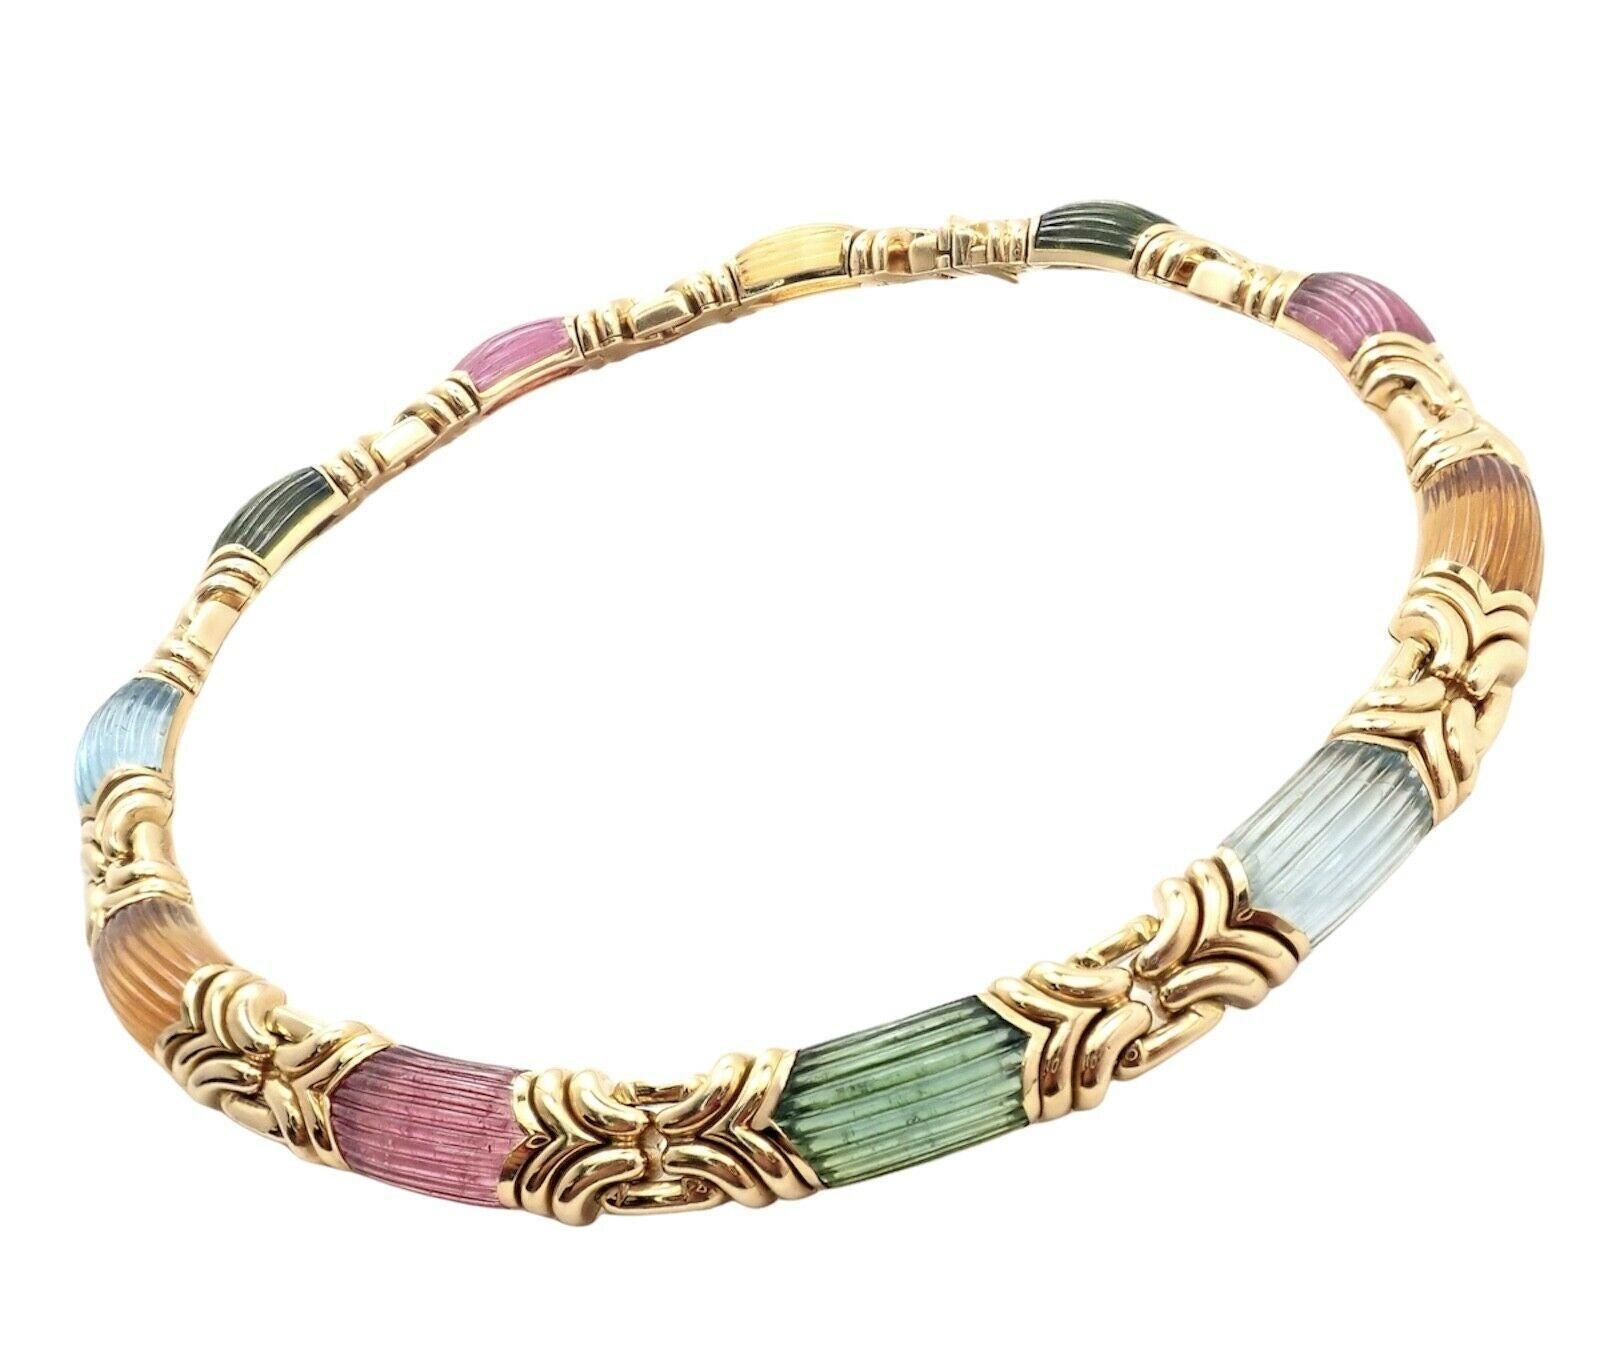 18k Yellow Gold Carved Tourmaline, Topaz, Citrine Stones Alveare Necklace by Bulgari. 
With 3x Carved Lemon Yellow Citrine
3x Carved Green Tourmaline
3x Carved Pink Tourmaline
2x Carved Blue Topaz
Each Stone is 10mm x 19mm
Details: 
Length: